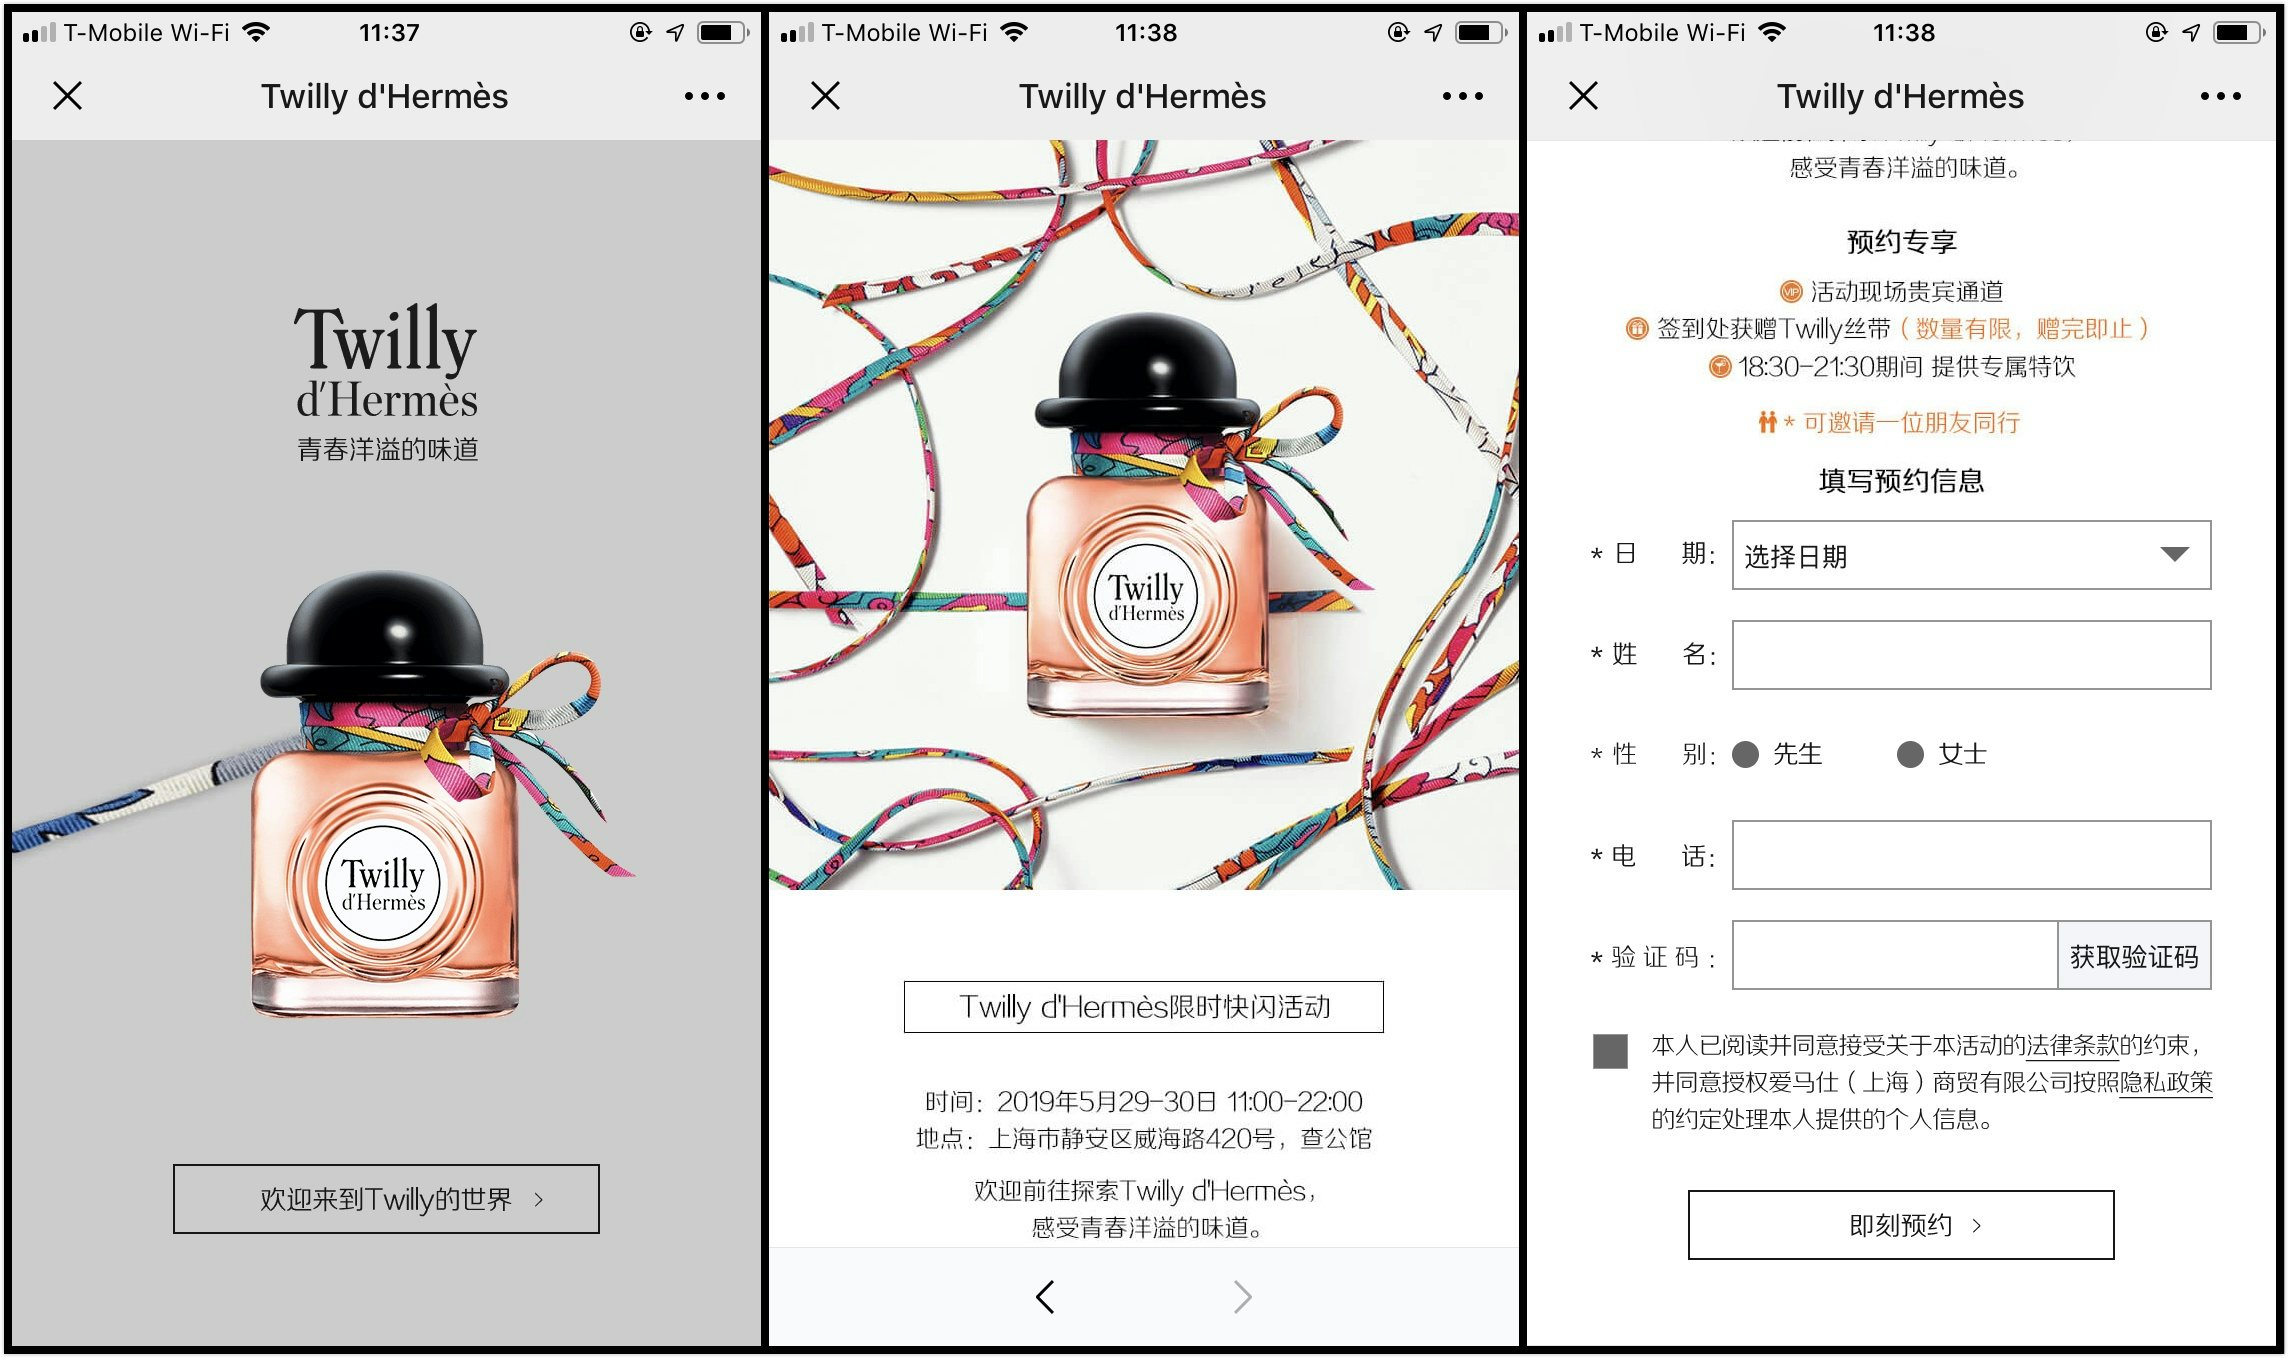 Two days before the event, Hermès created an HTML campaign on WeChat for followers to make online reservations. Photo: Jing Daily illustration